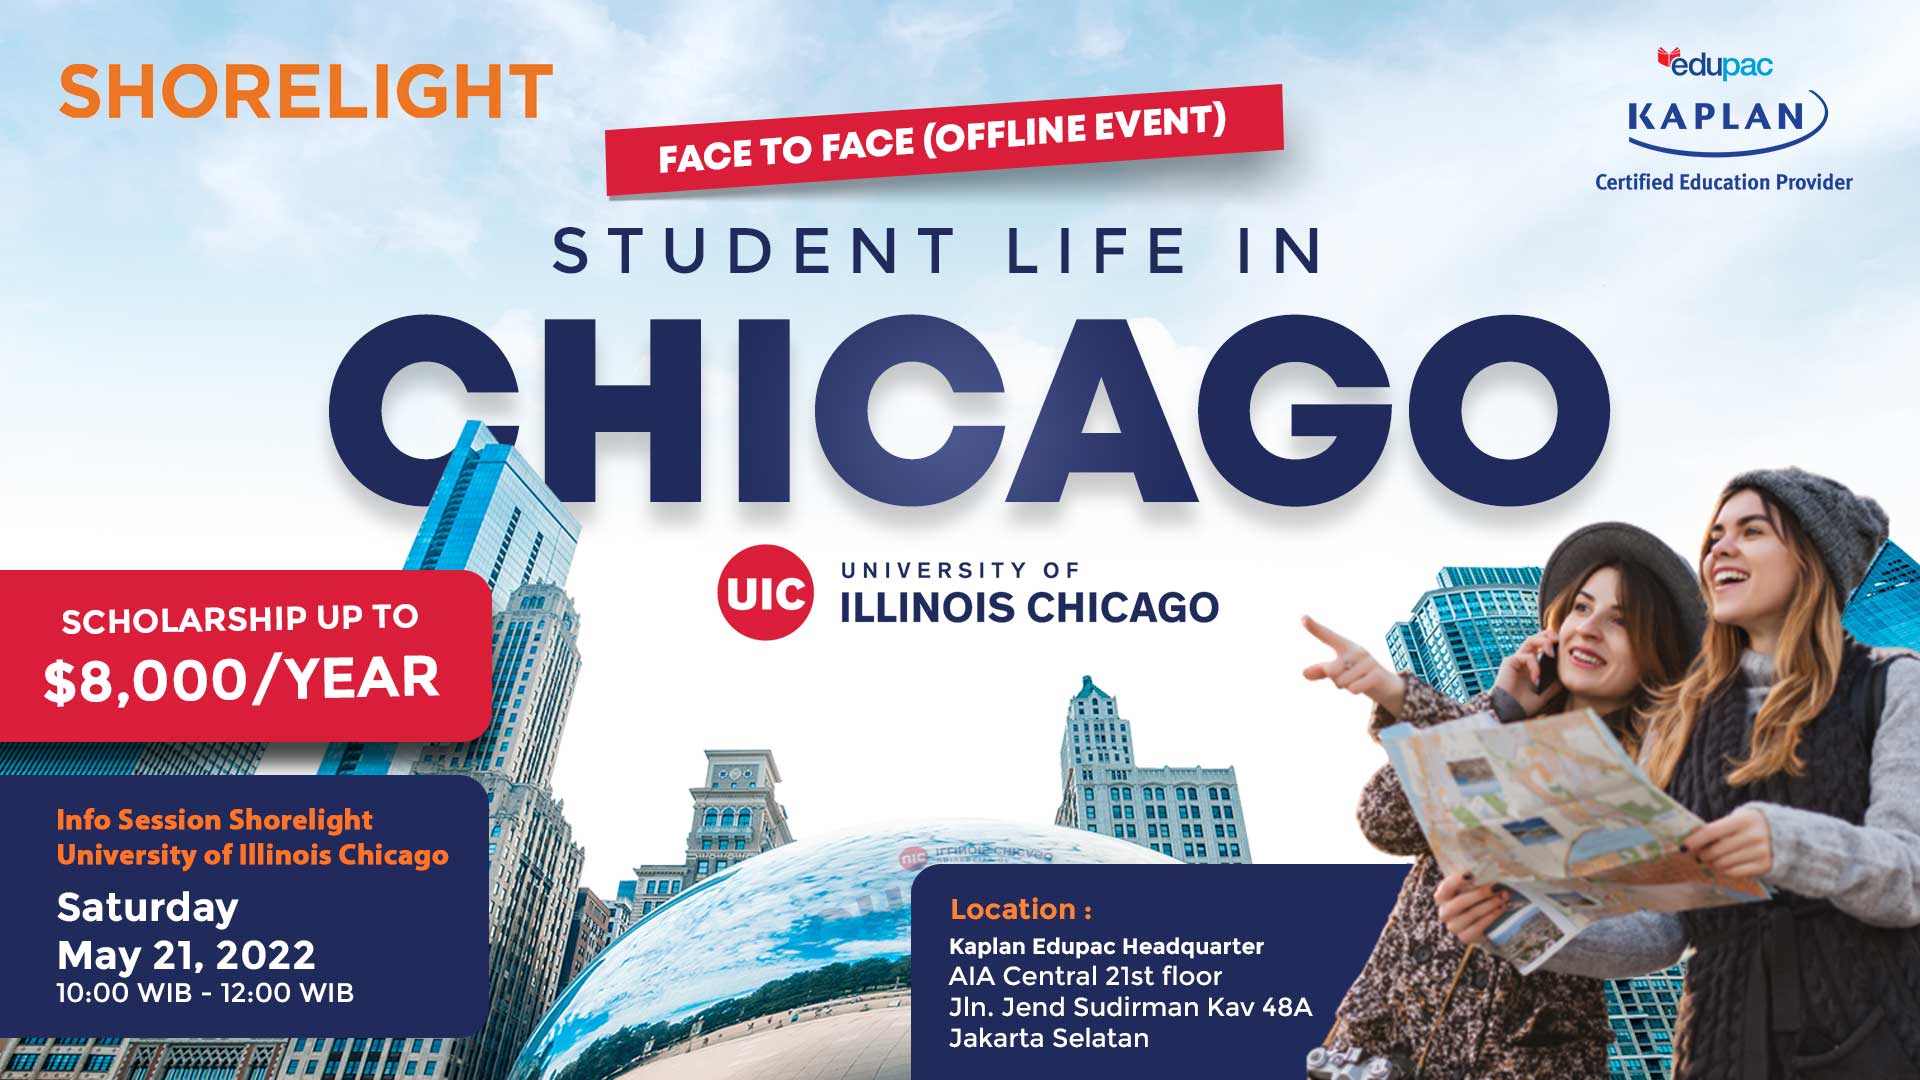 Free Offline Event "Student Life in Chicago - University of Illinois Chicago (UIC)" 